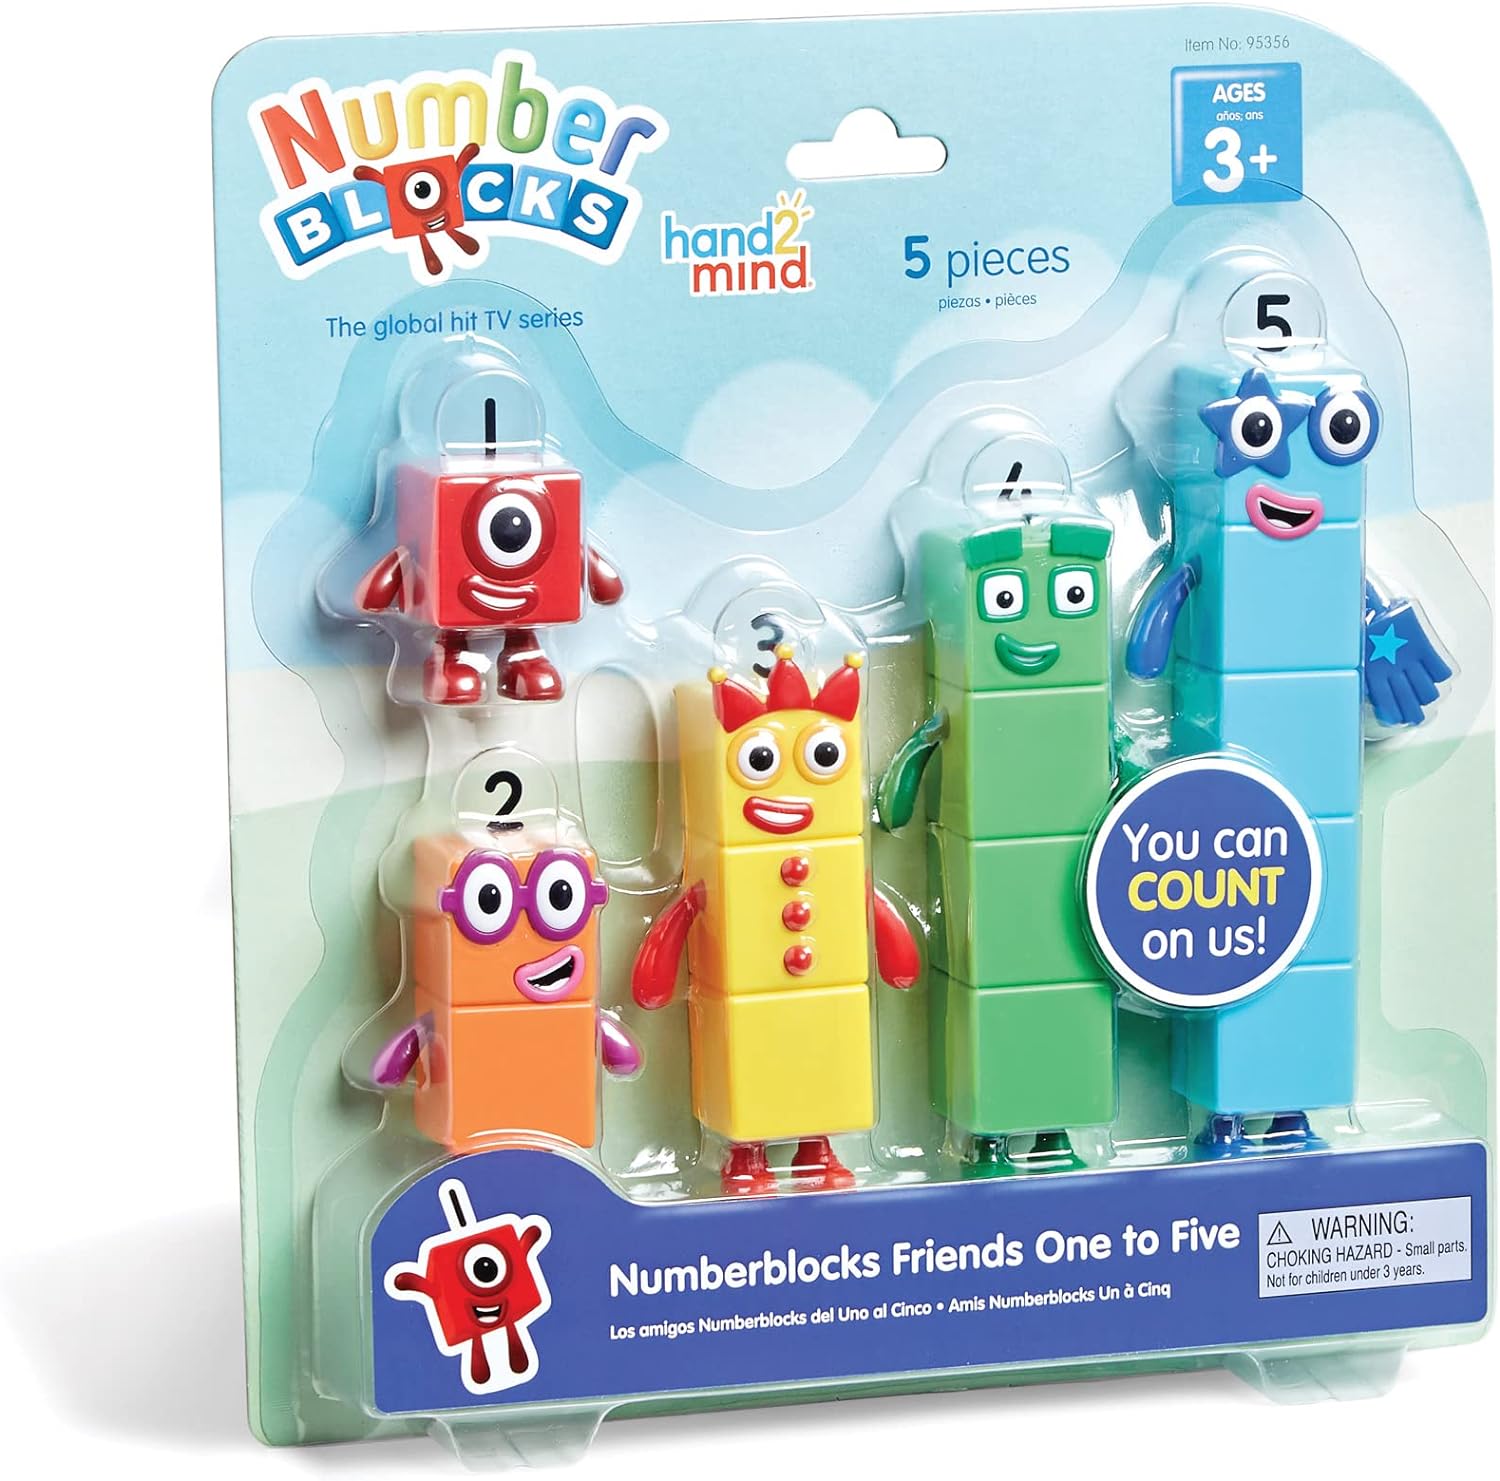 The product package for Numberblocks Figures One to Five